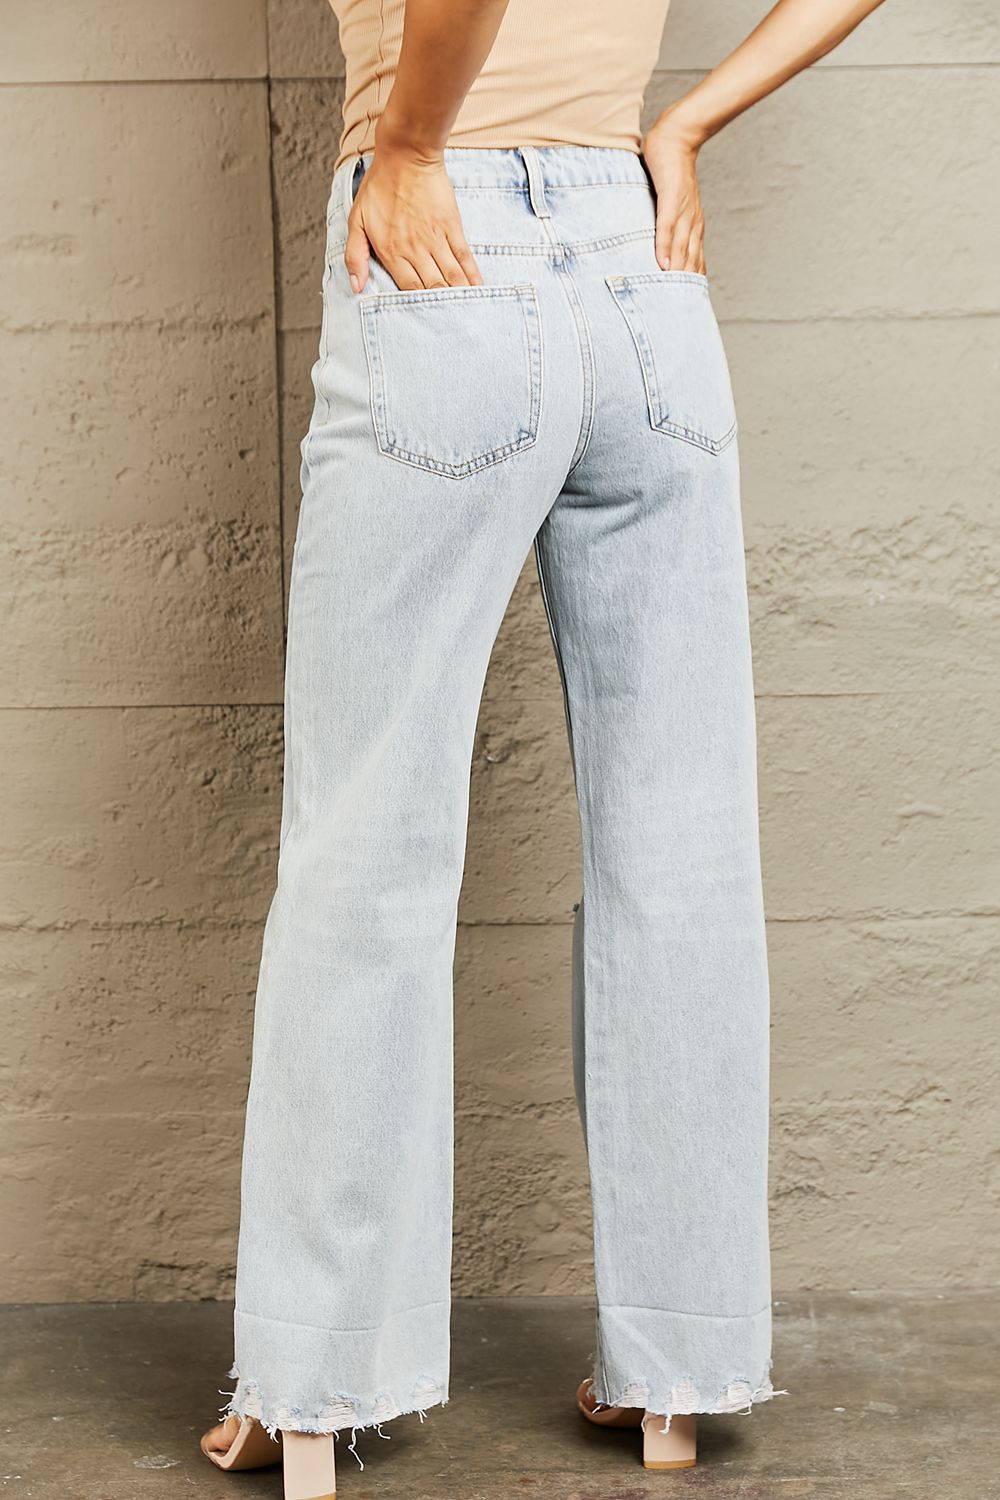 BAYEAS High Waist Flare Jeans - Jeans - FITGGINS